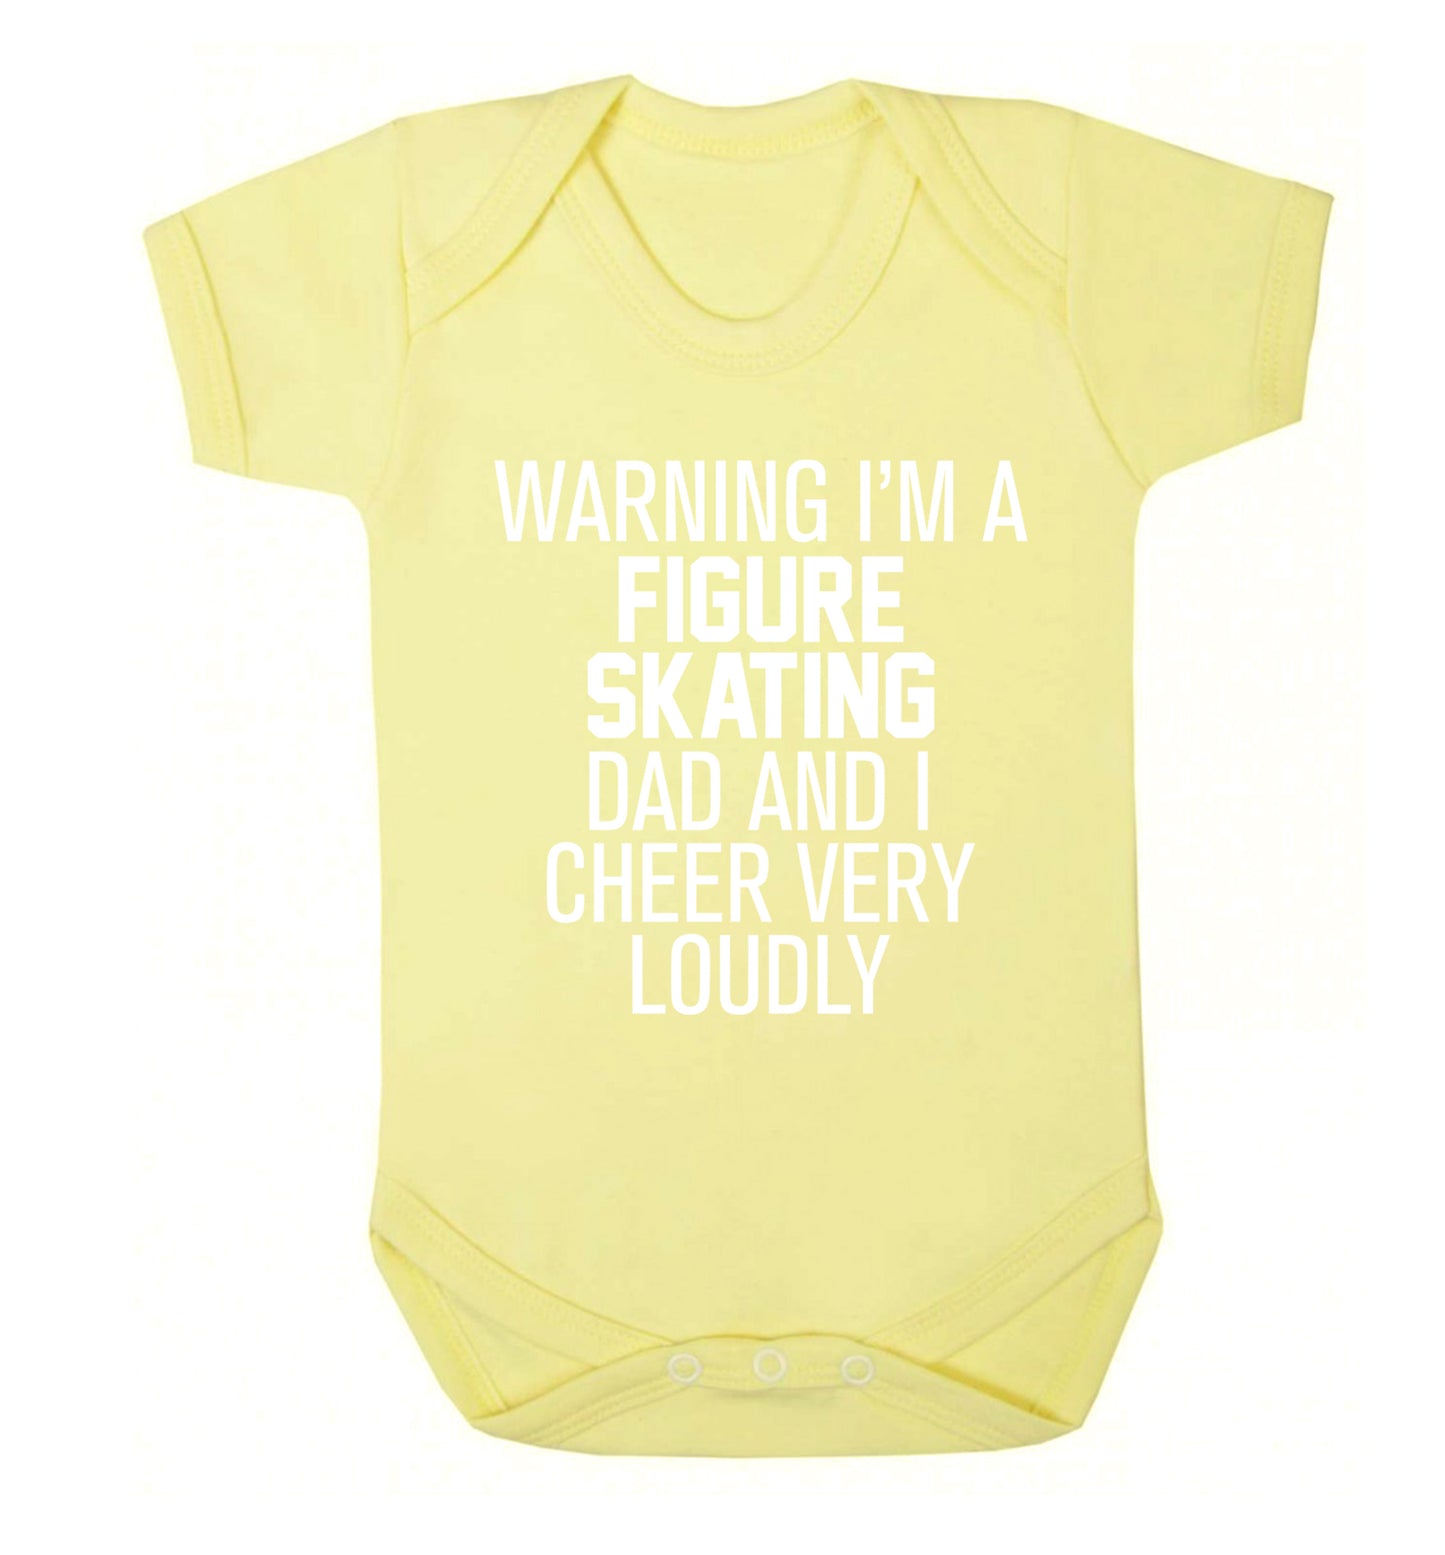 Warning I'm a figure skating dad and I cheer very loudly Baby Vest pale yellow 18-24 months